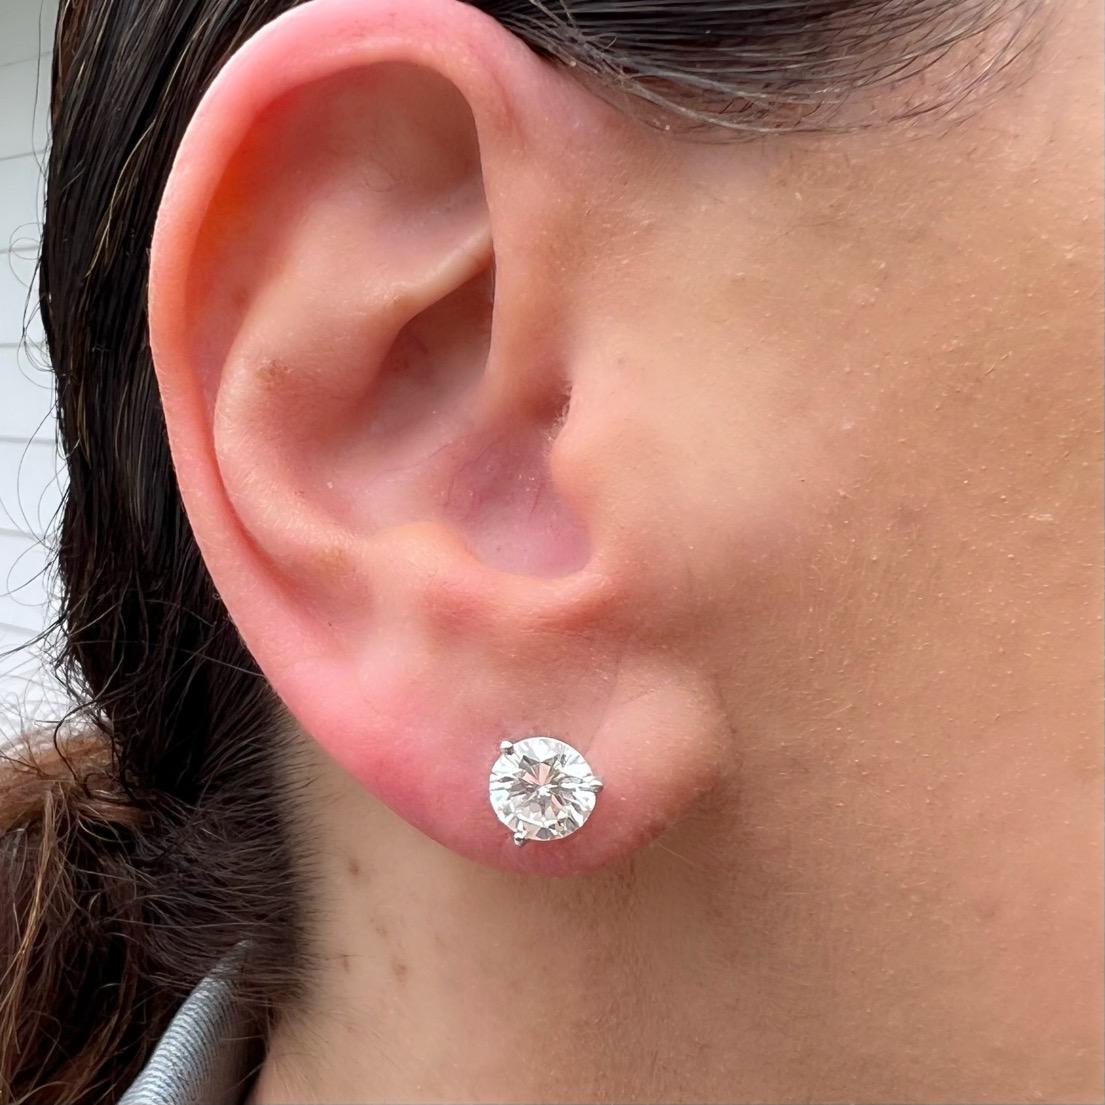 Diamond studs meant to be worn for a lifetime! These extremely white and clean round brilliant cut diamond studs feature two incredibly well matched diamonds weighing 1.57 carats and 1.55 carats, for a total diamond weight of 3.12 carats. Set in 18